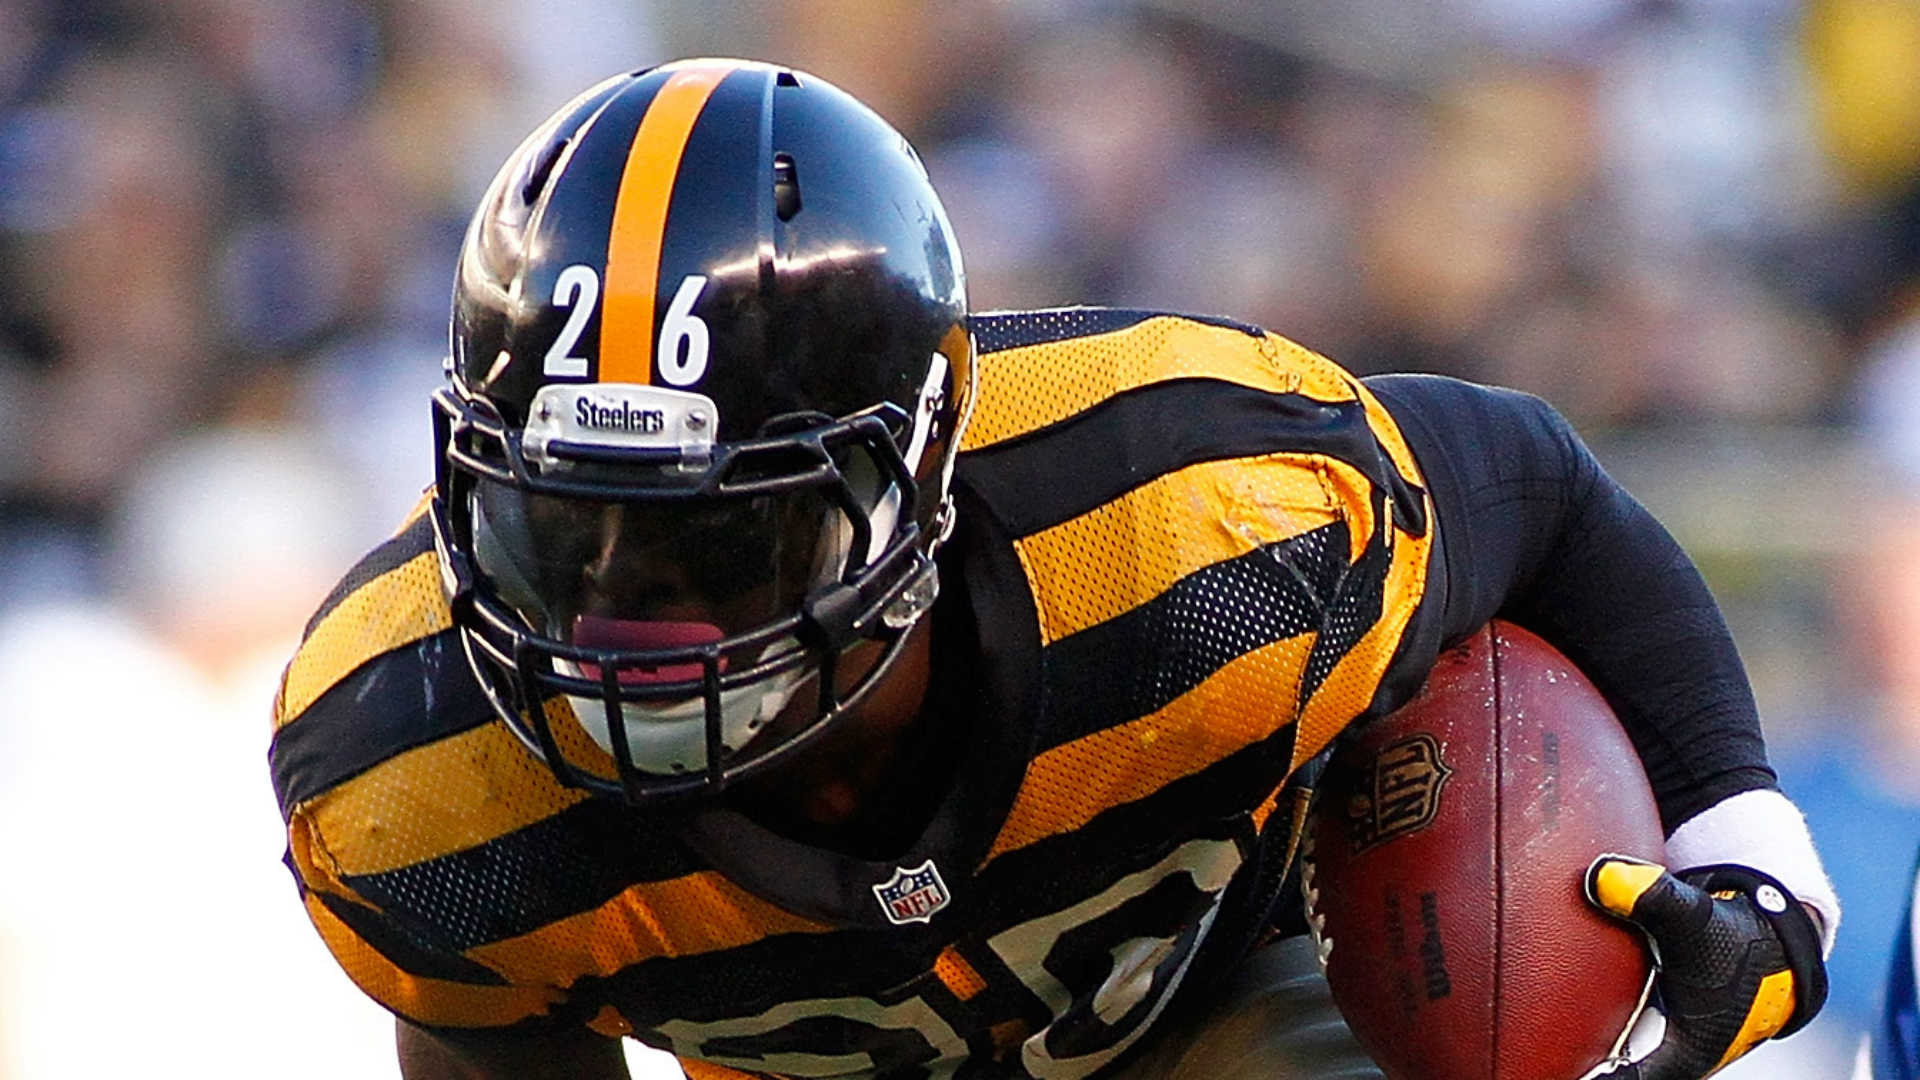 Pittsburgh RB Le'Veon Bell ropes himself into prom date